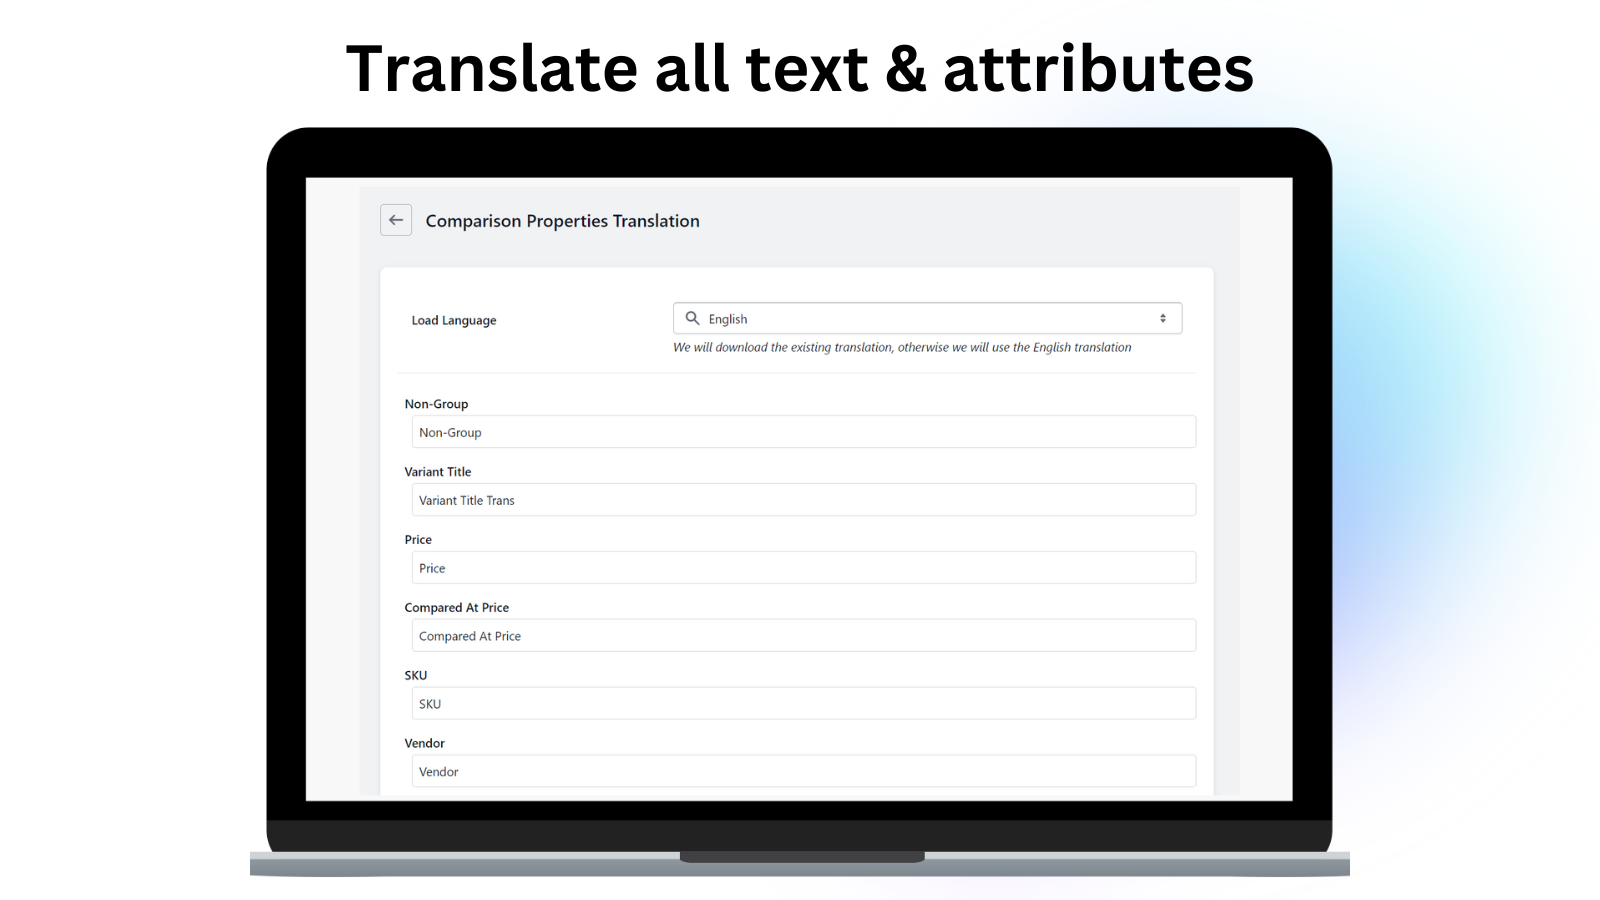 Translate all texts and attributes